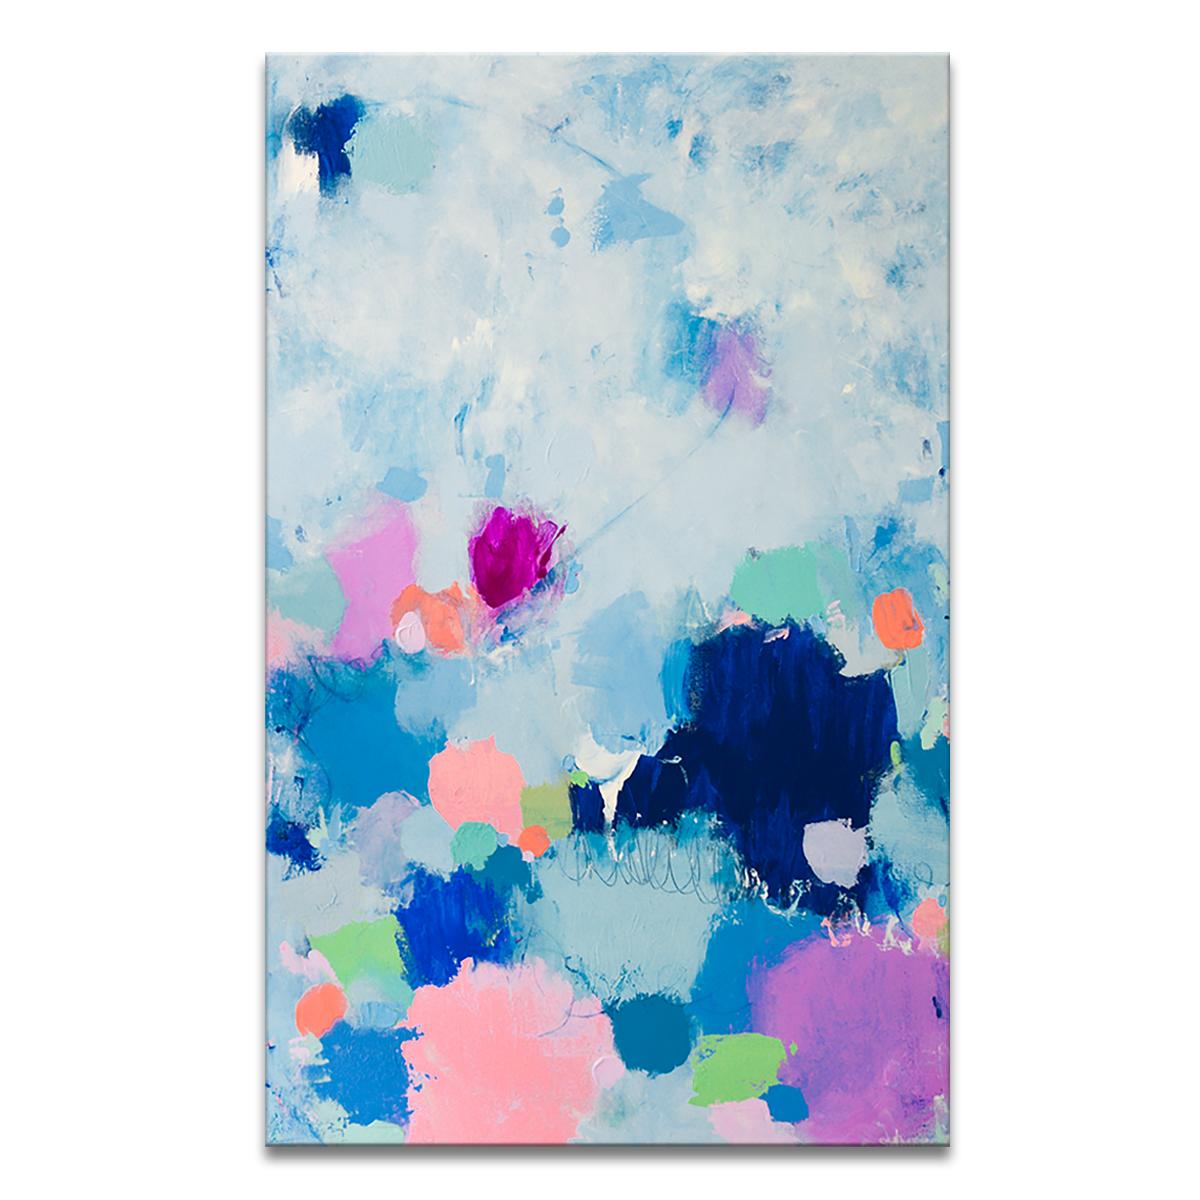 ‘Dreams Coming True' Wrapped Canvas Original Painting features a whimsical abstract aesthetic in vivid hues of blue, pink, green, orange, and purple. Inspired by her travels and belief of speaking through color, Samerra’s abstract work is a